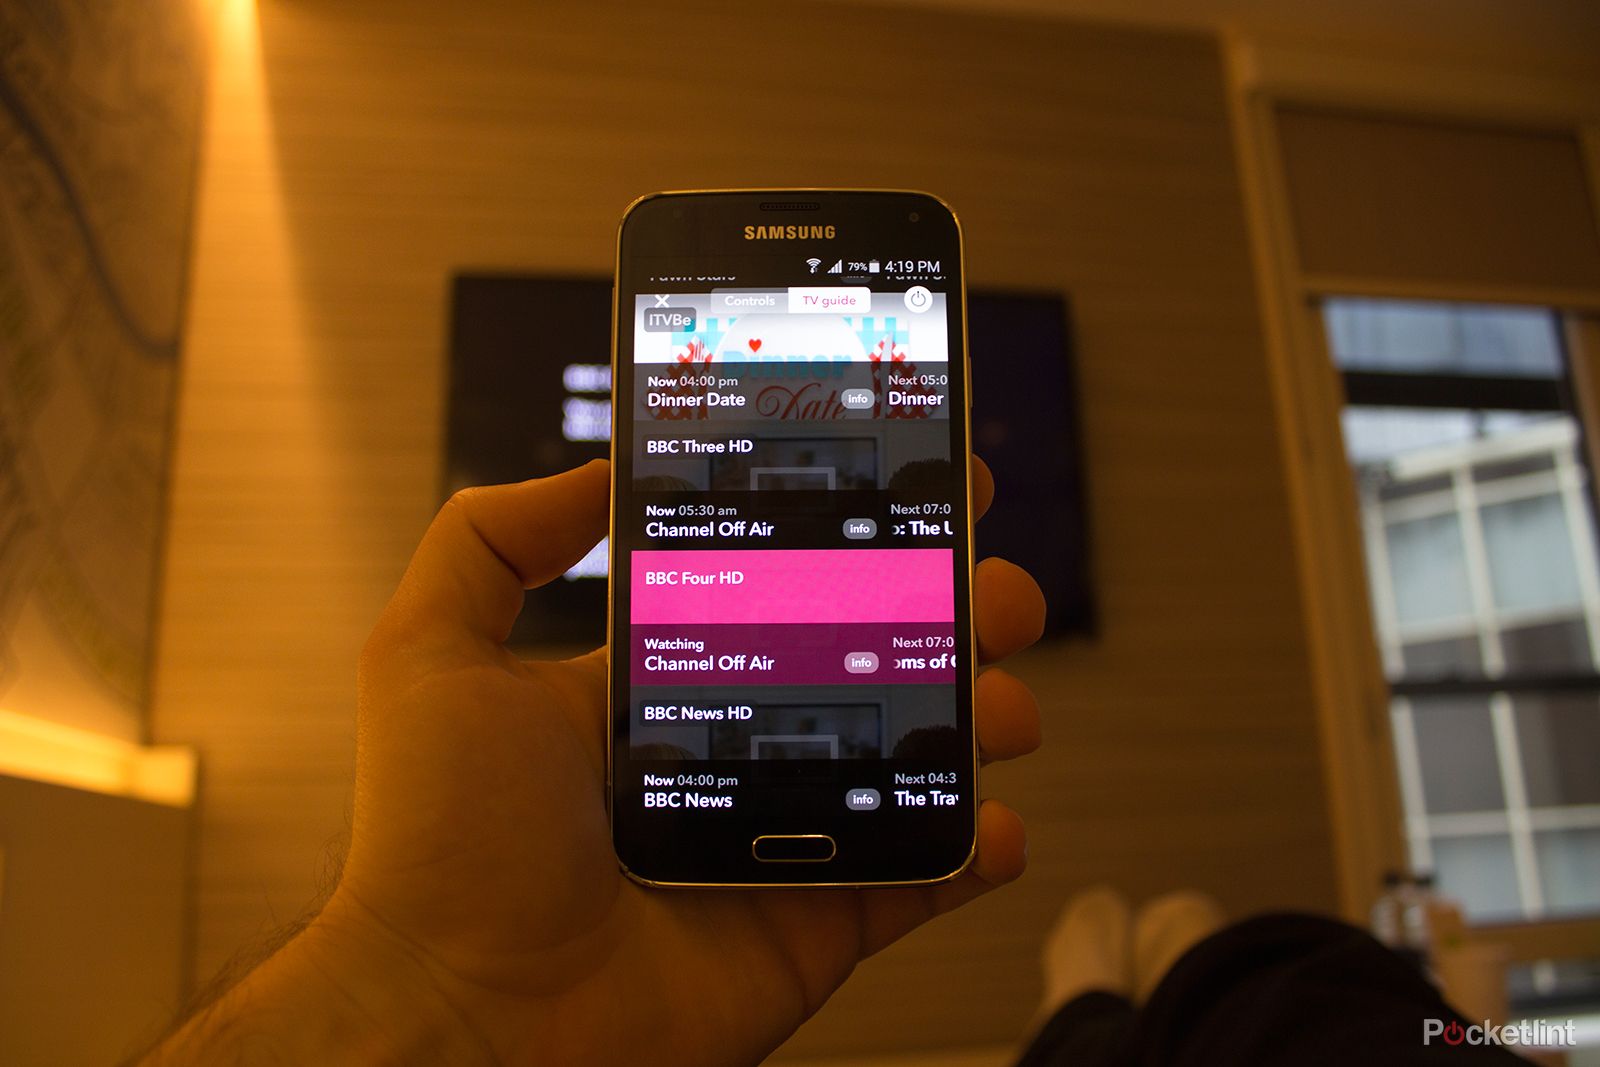 hub by premier inn what it’s like to spend a night in the app controlled high tech hotel room of the future image 14